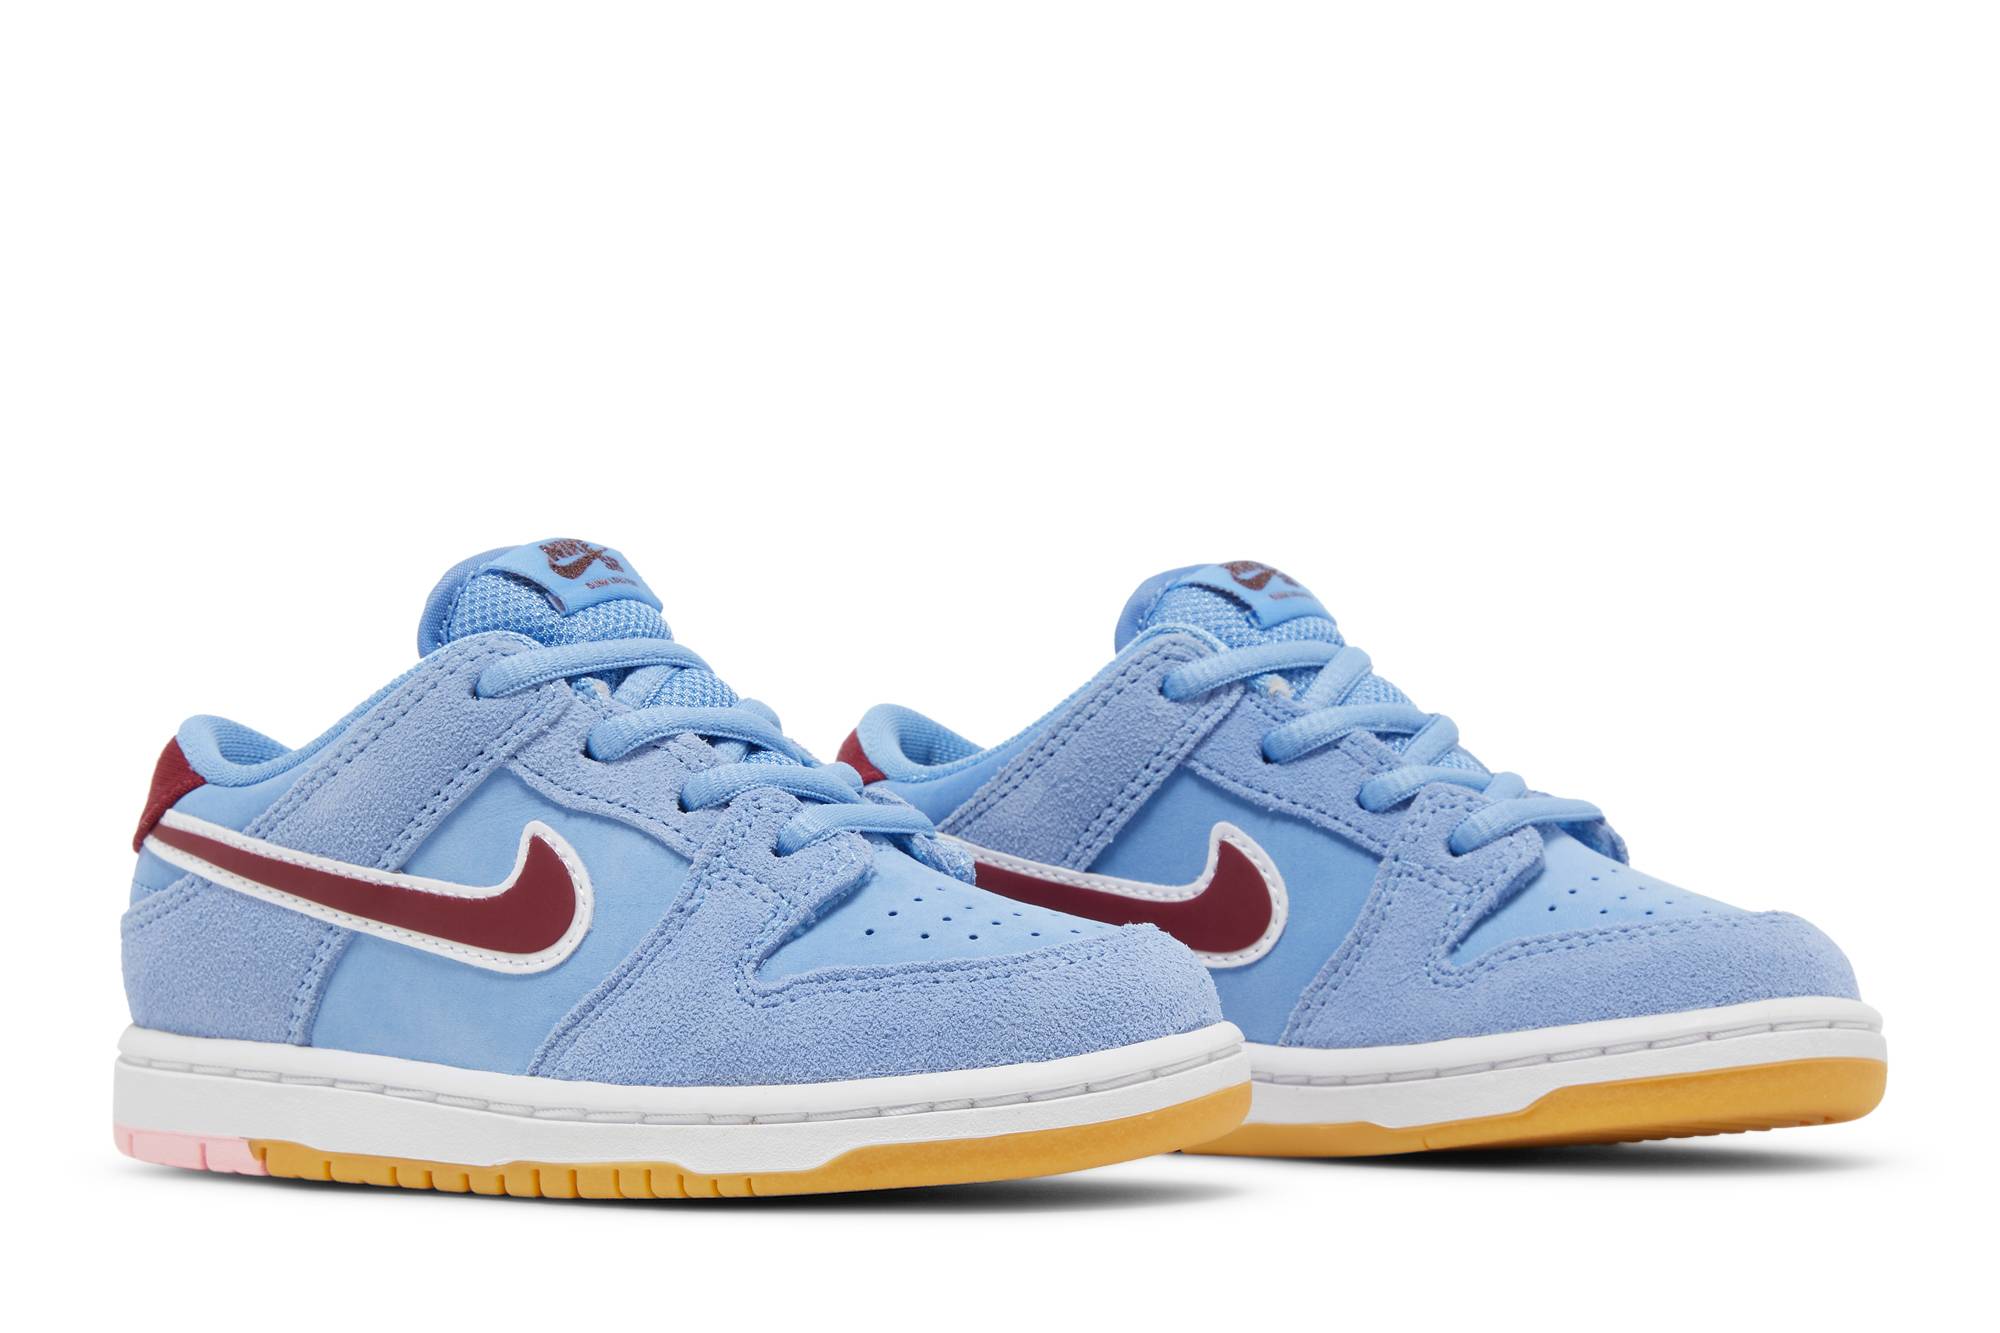 Toddler) Nike SB Dunk Low Pro 'Phillies/Valor Blue and Team Maroon'  DN3673‑400 - DN3673-400 - Novelship